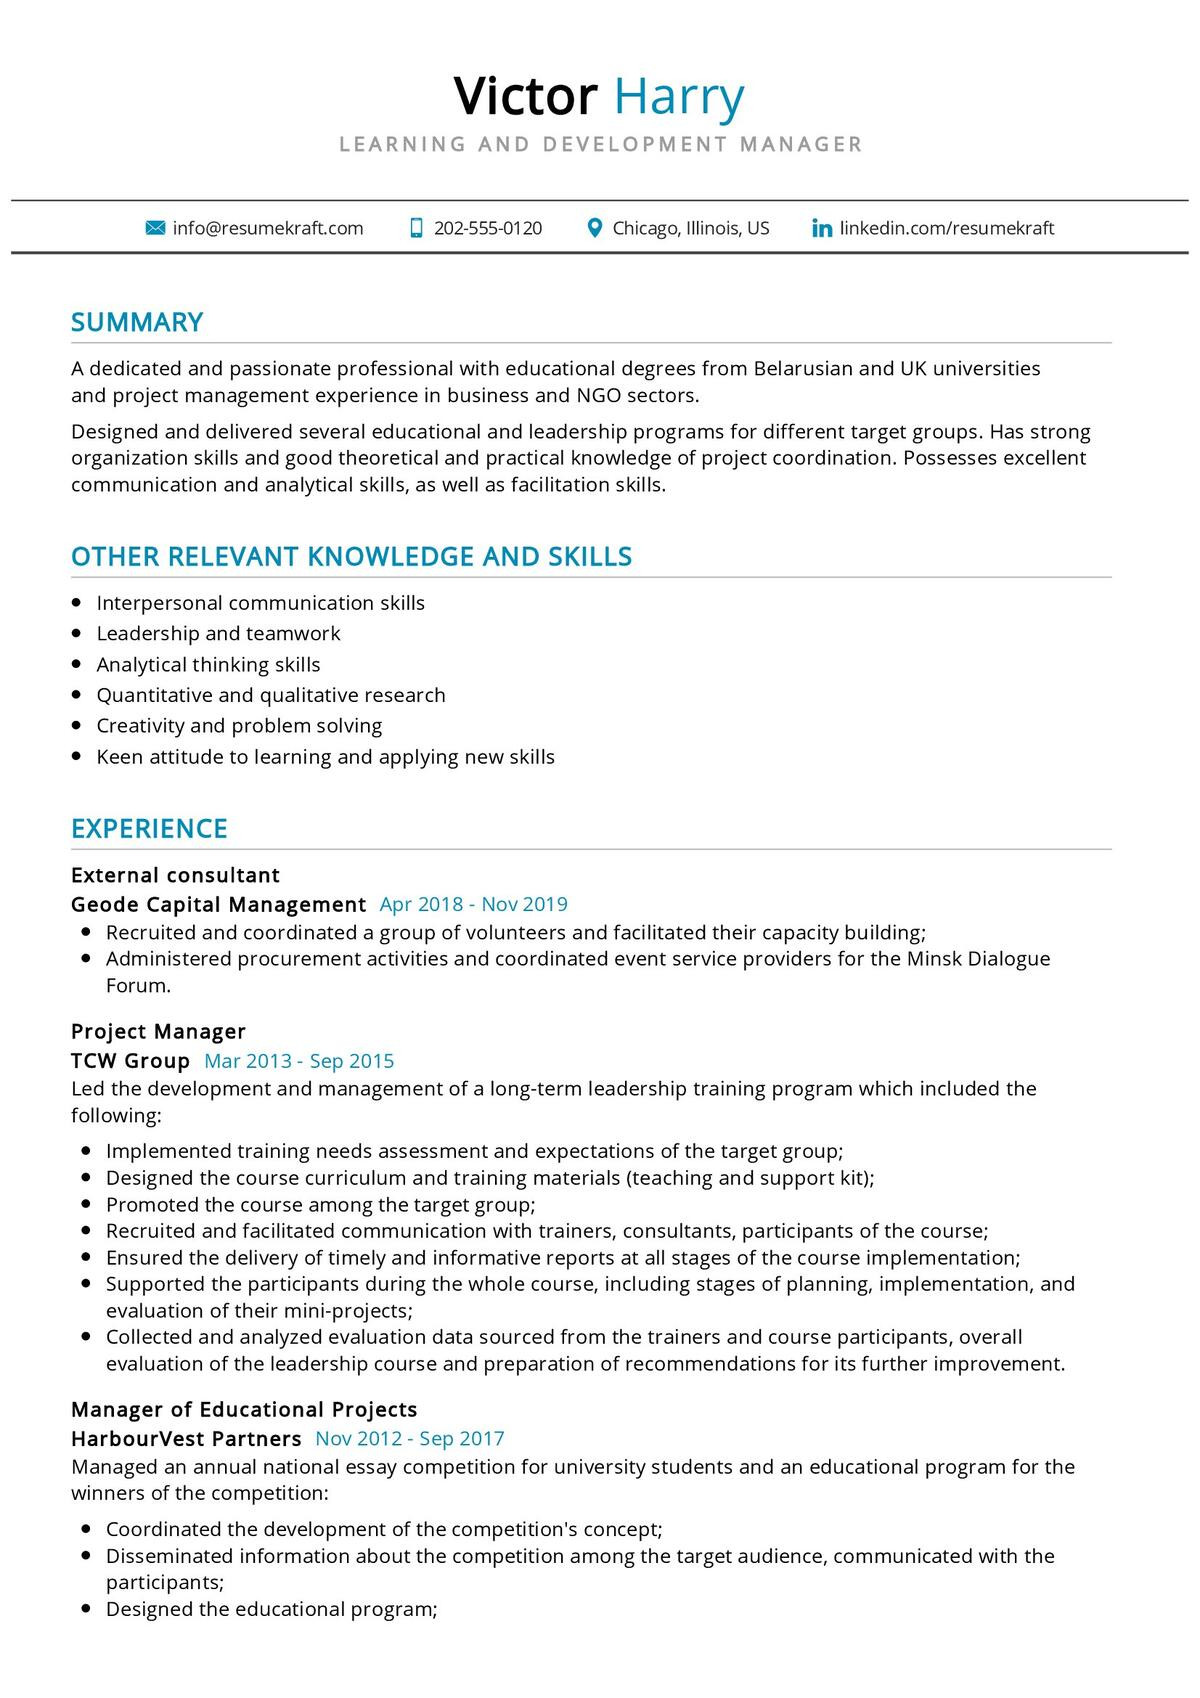 learning and development manager resume